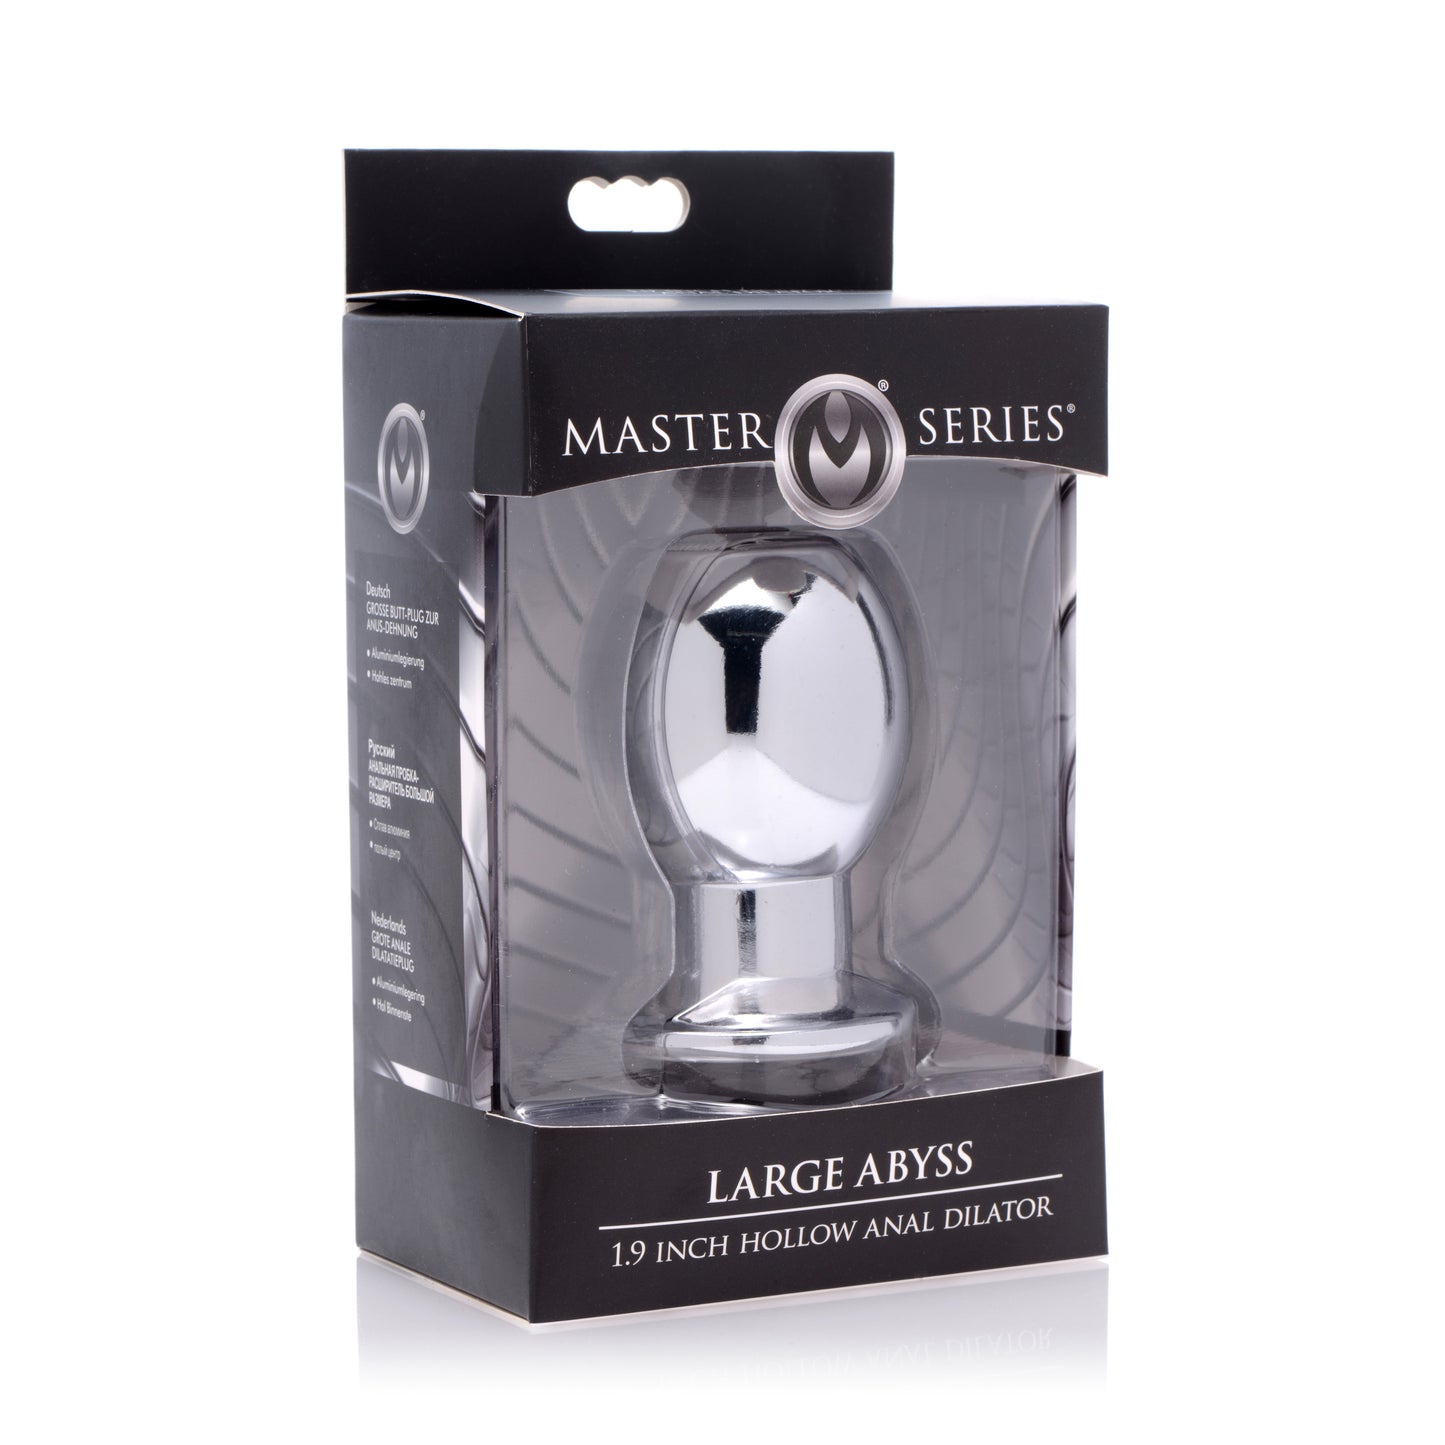 Large Abyss 1.9 Inch Hollow Anal Dilator